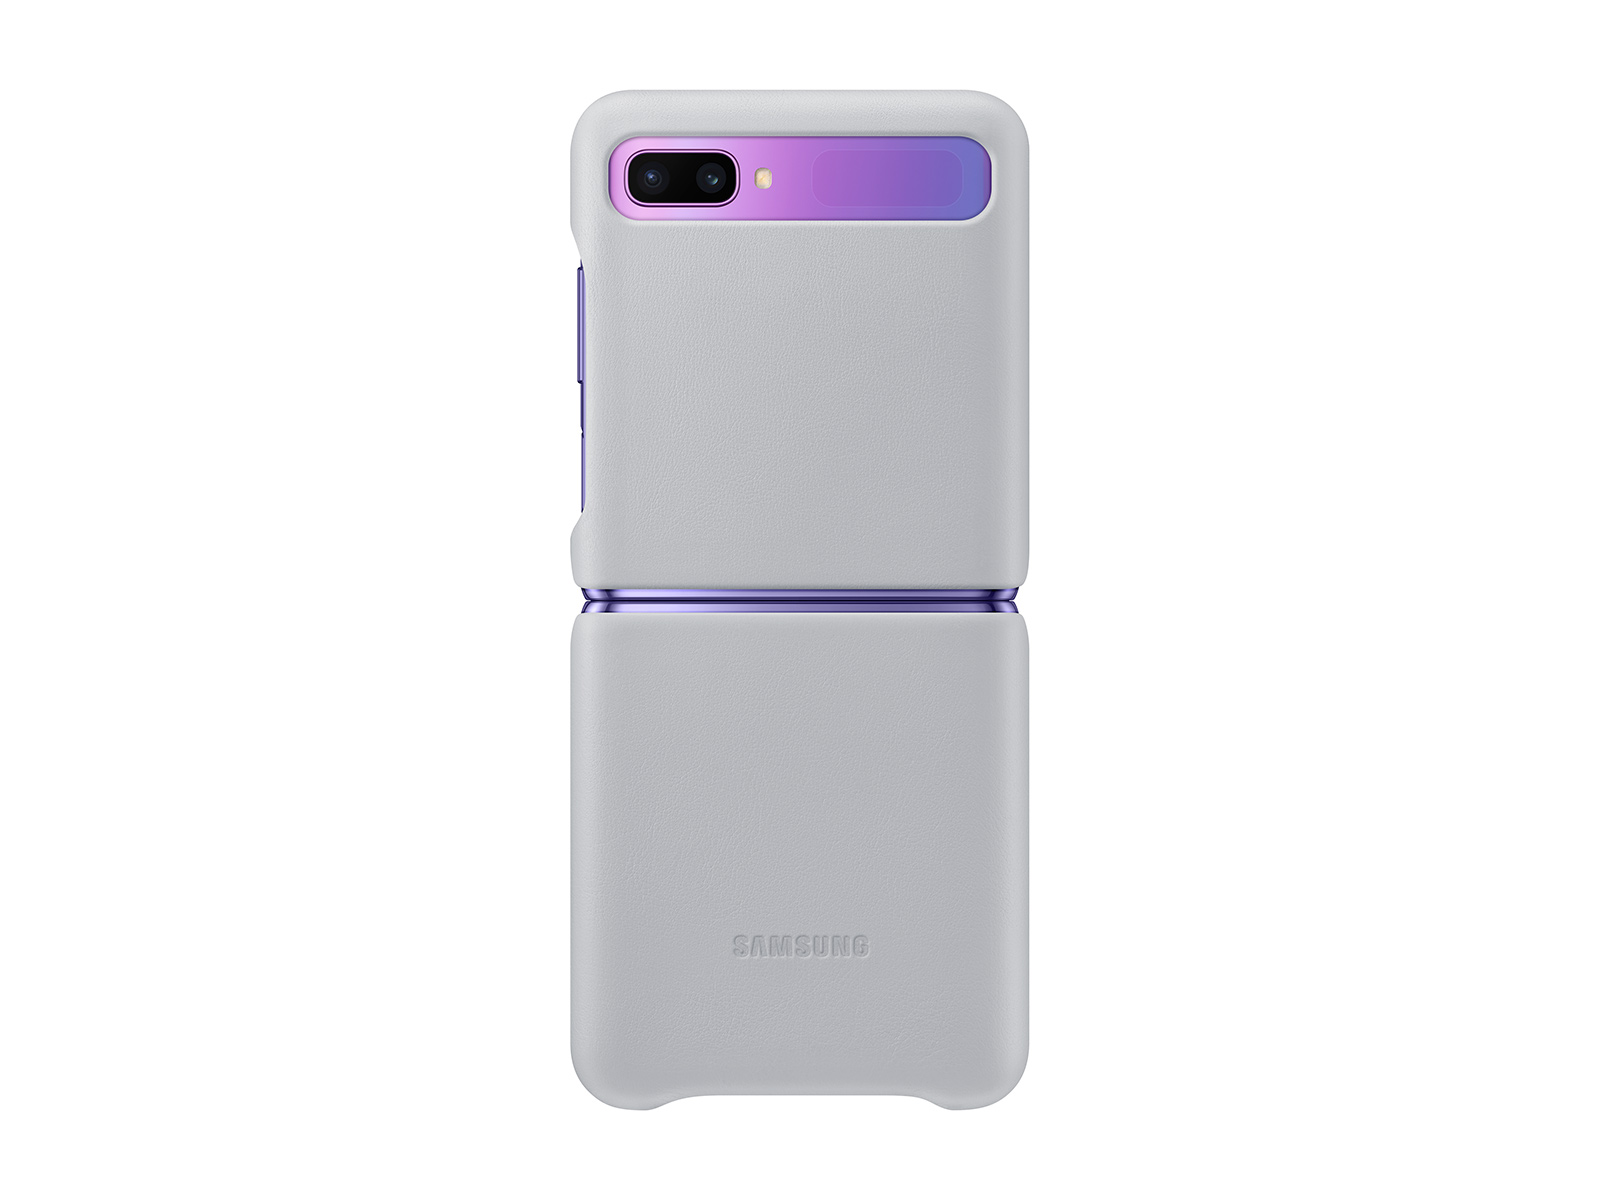 Galaxy Z Flip Leather Cover Silver Mobile Accessories Ef Vf700lsegus Samsung Us